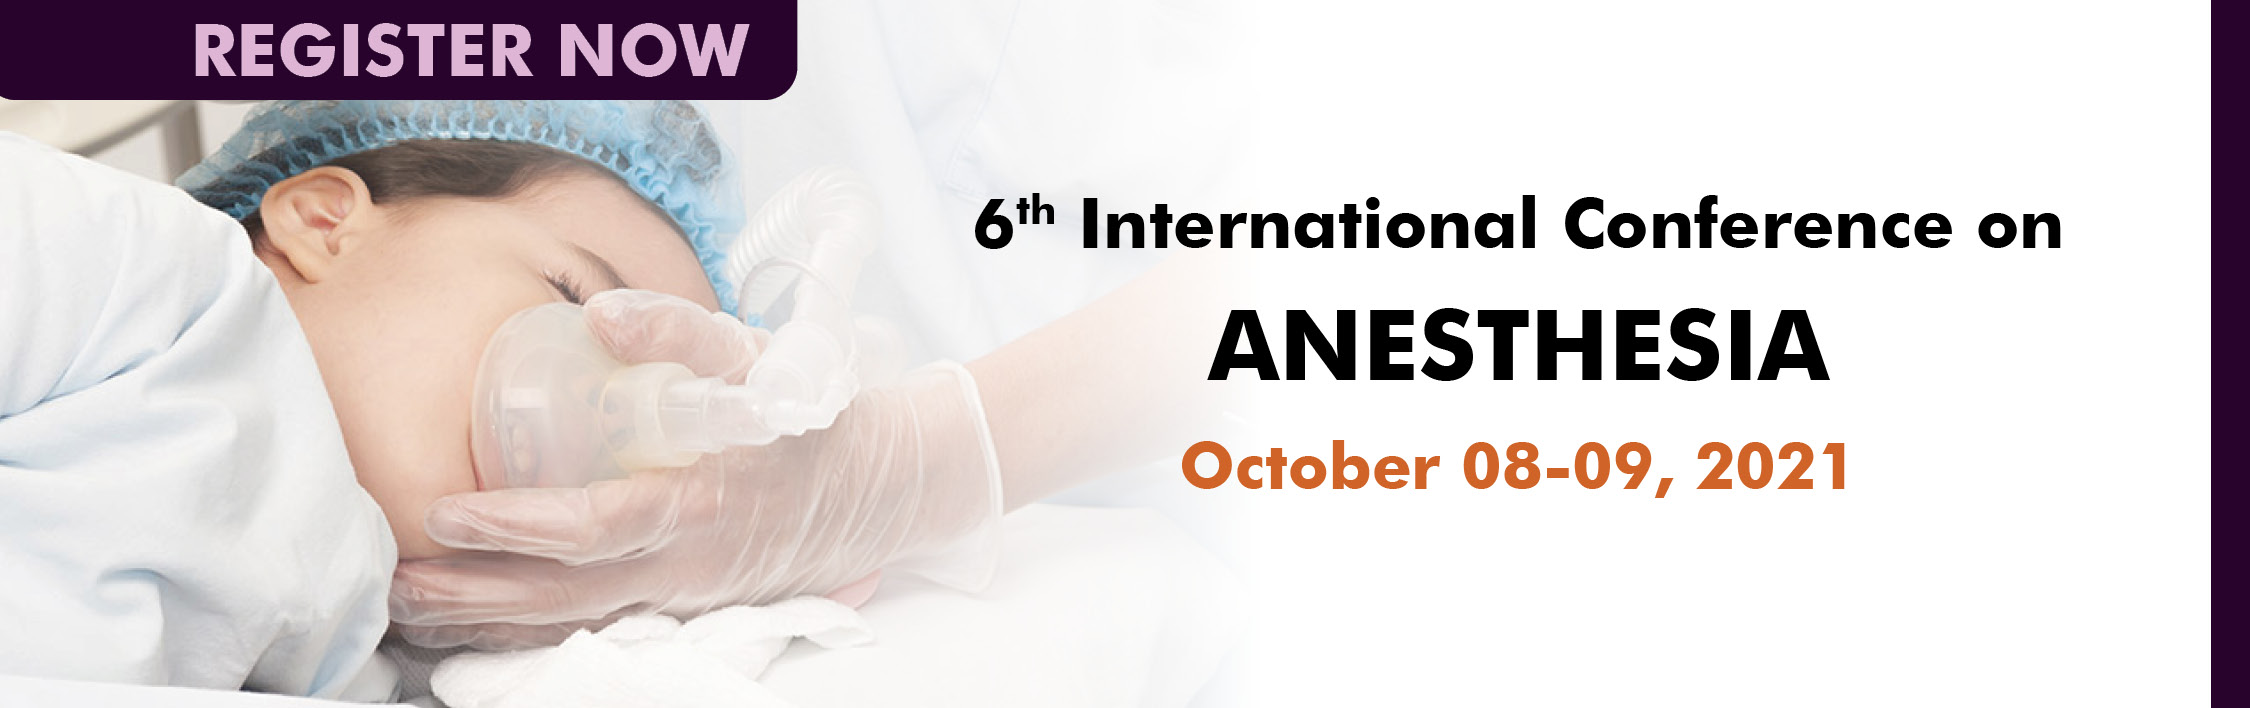 Anesthesia Conference Anesthesiology Conference Neurosurgery